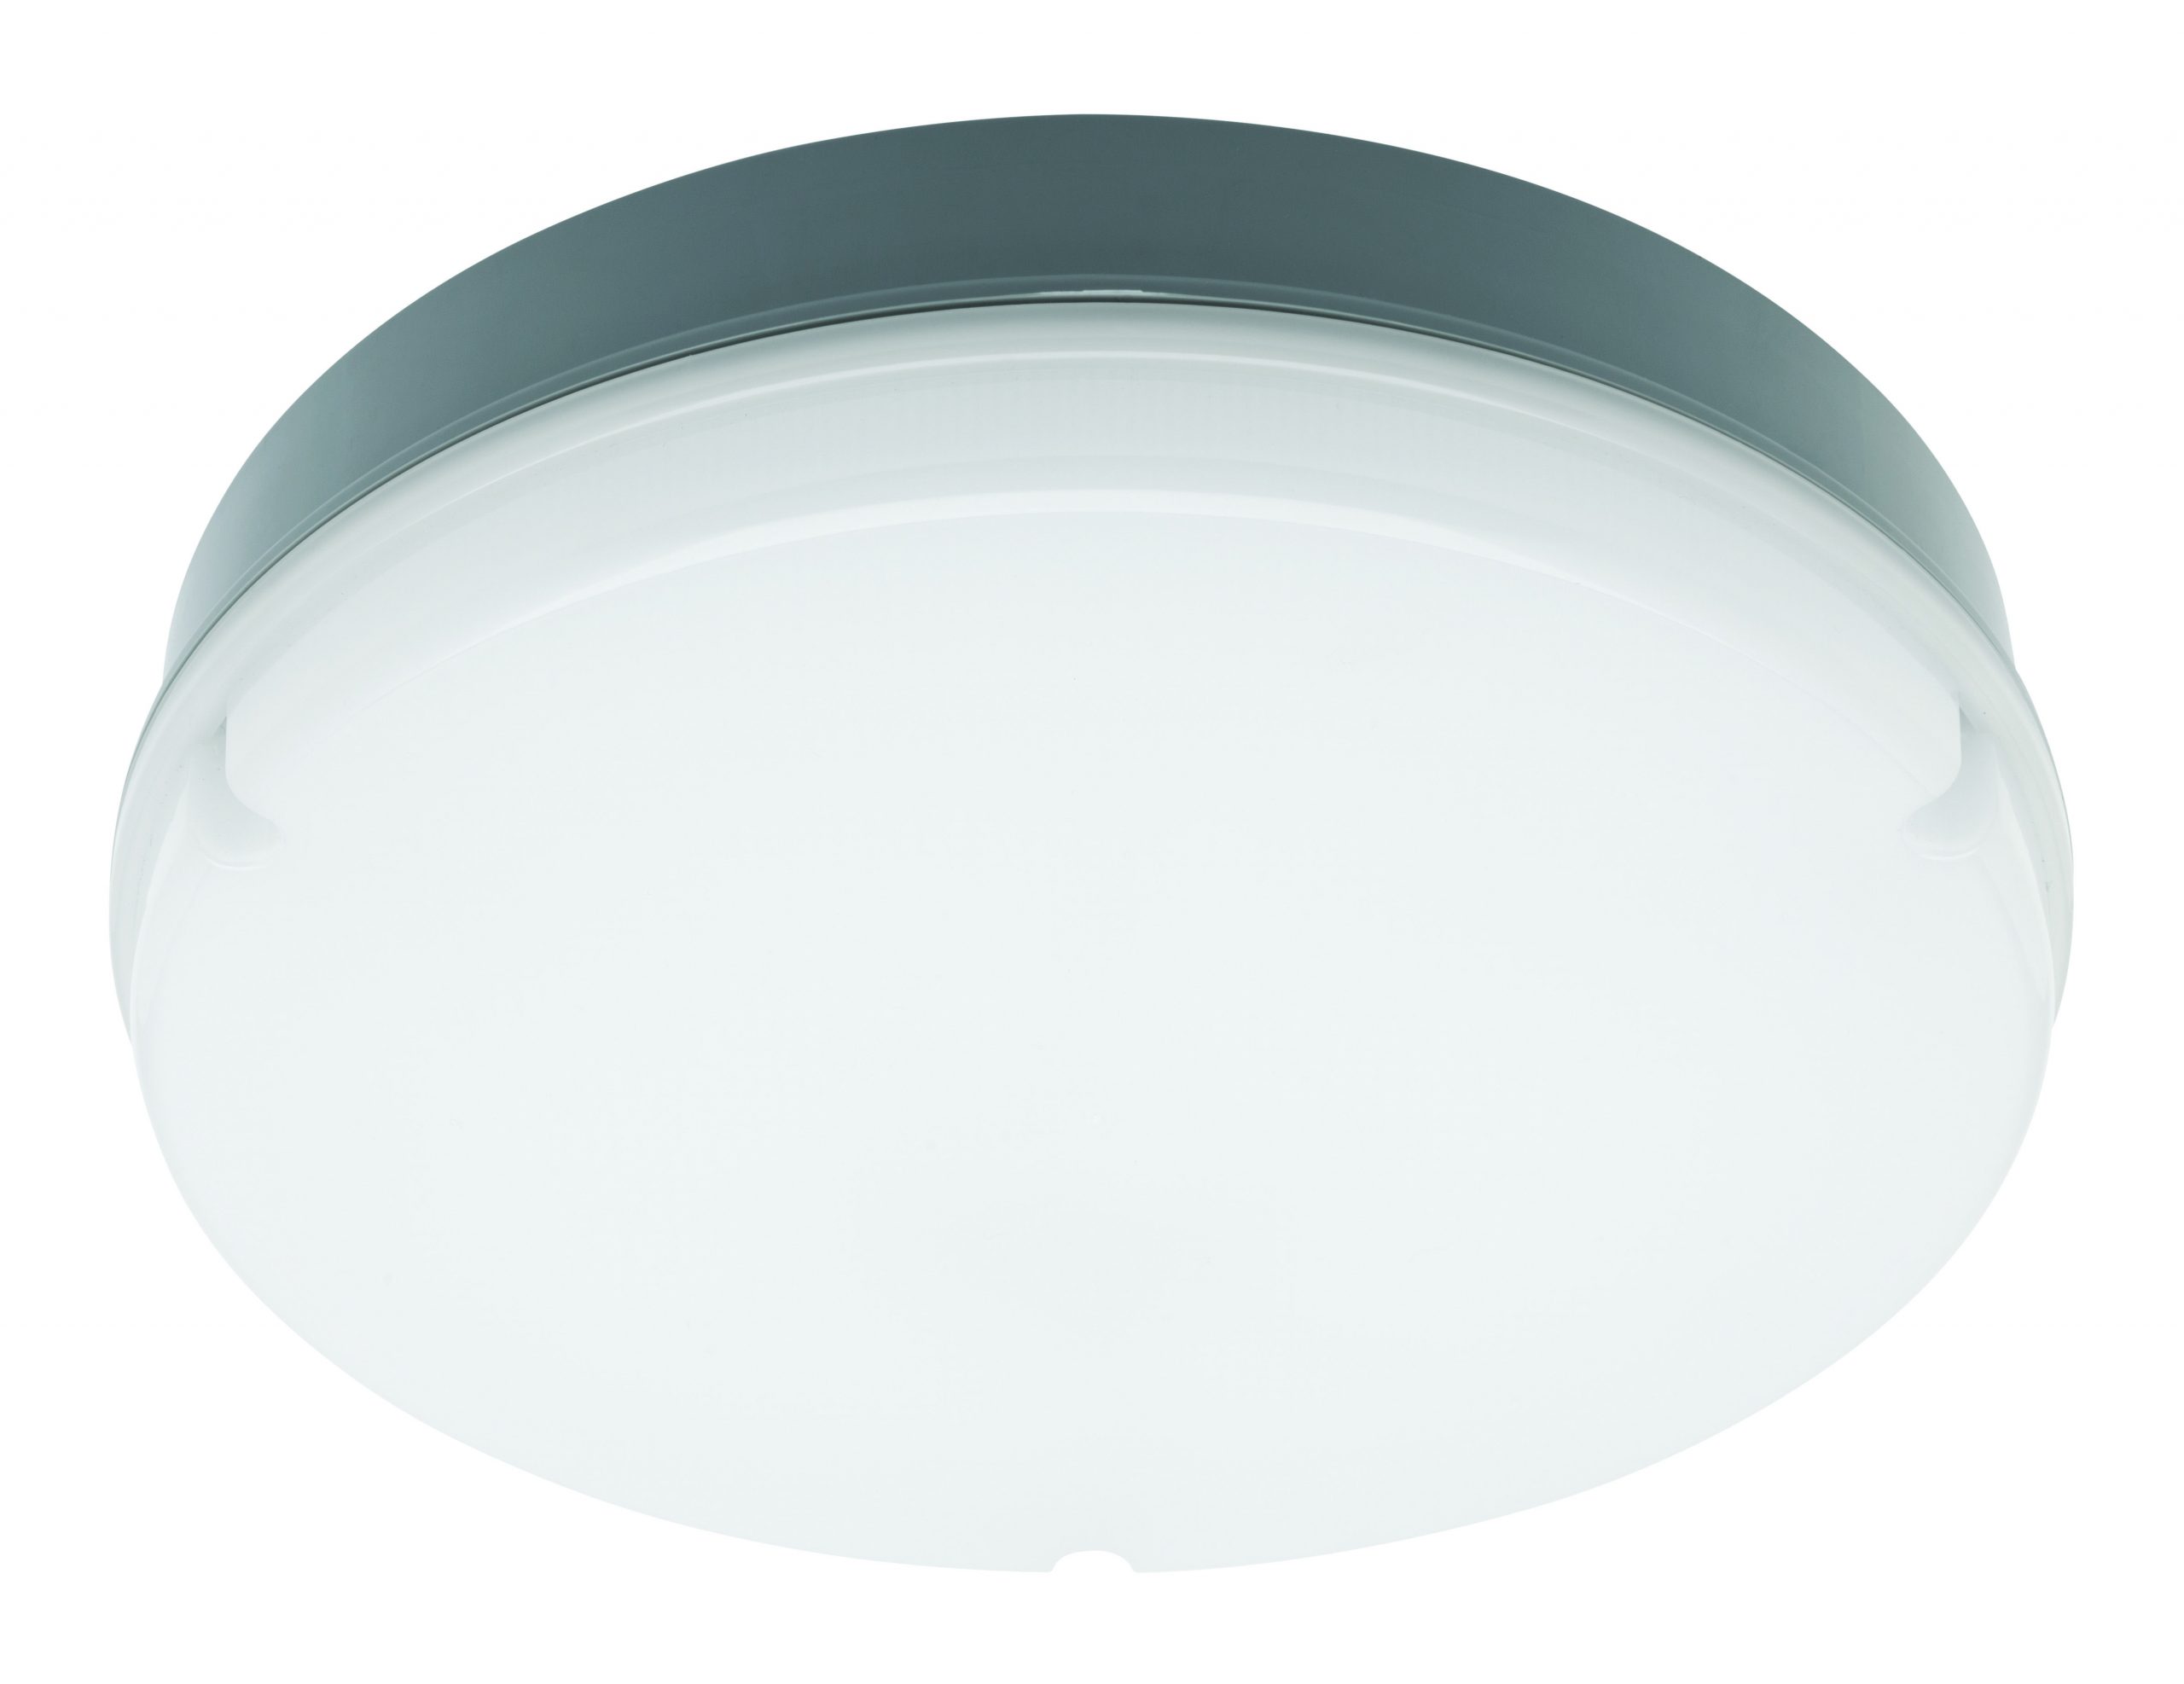 The Led Swell Ceiling Light Mercator Lighting Features A with regard to size 4780 X 3686